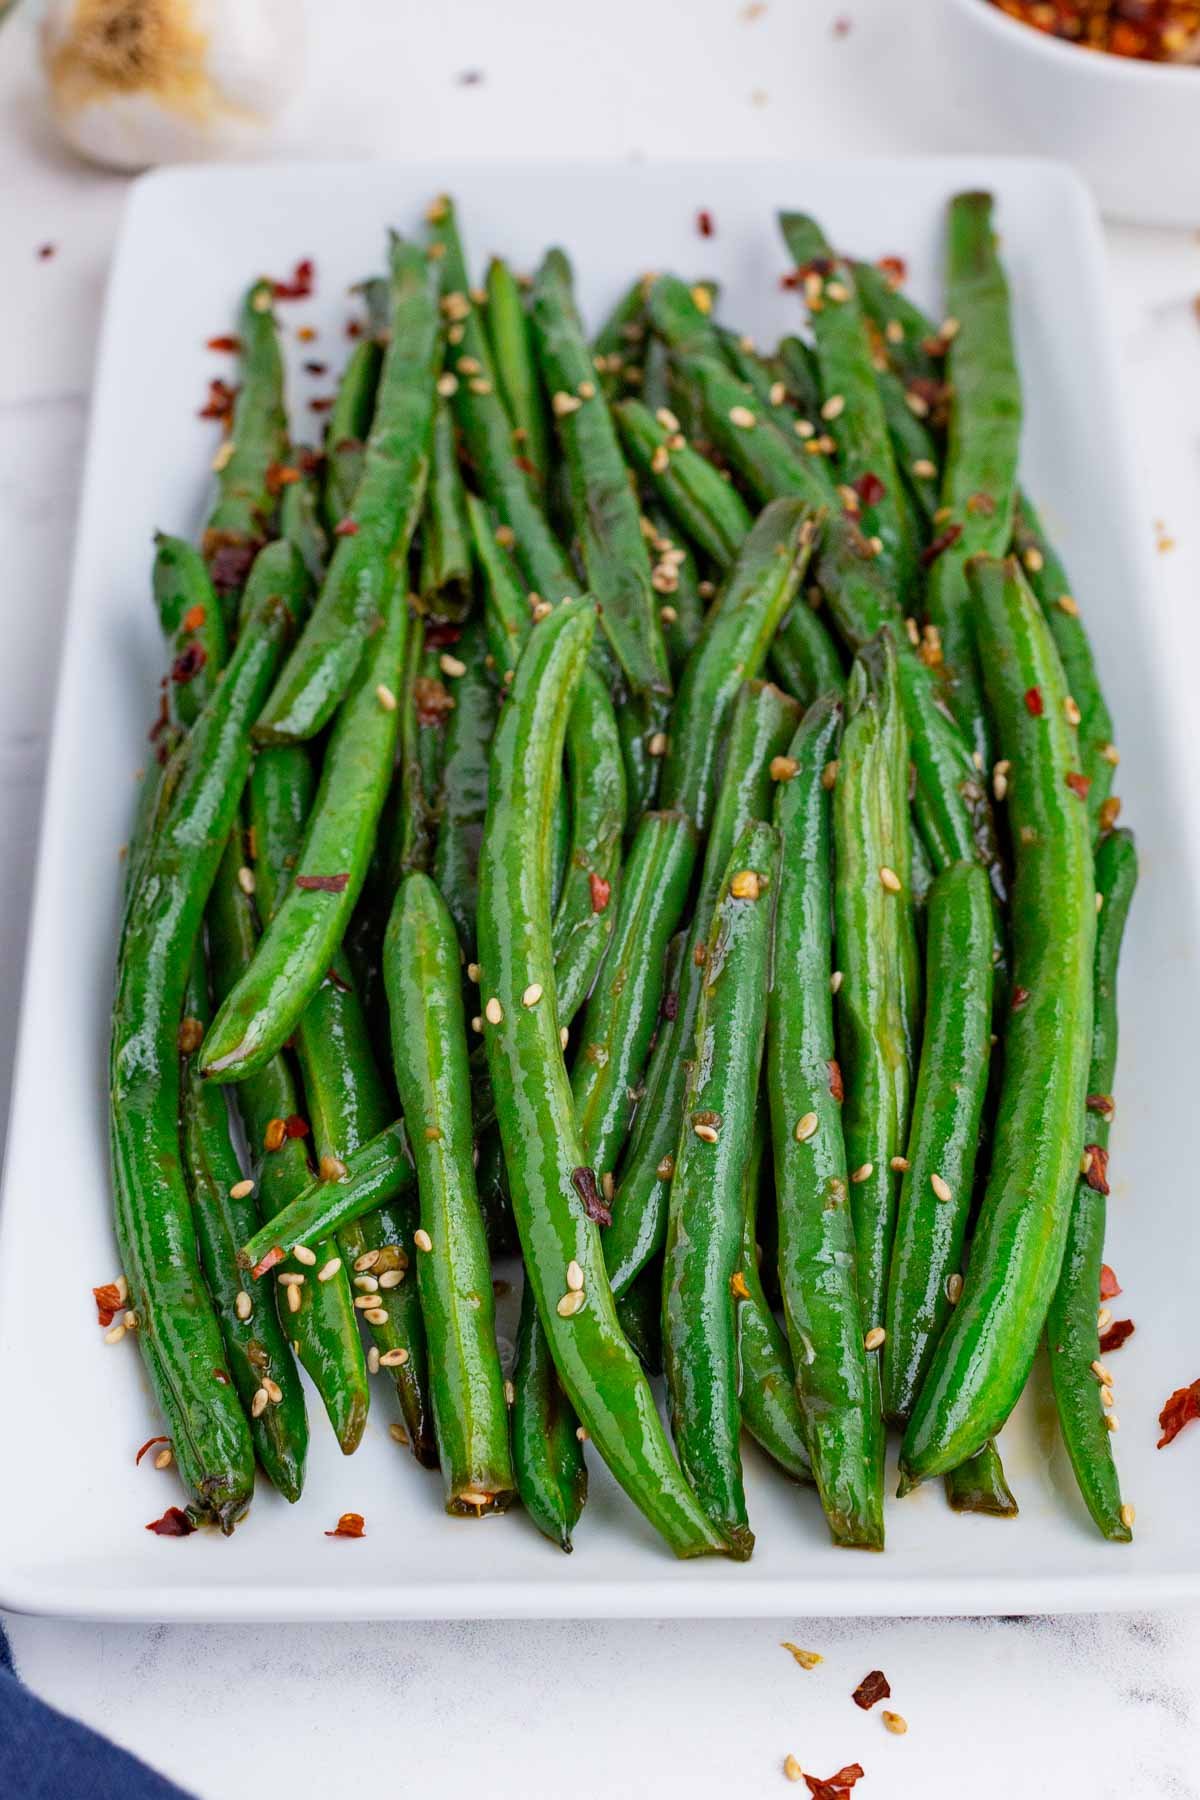 Serve up these spicy green beans as a flavorful side dish.